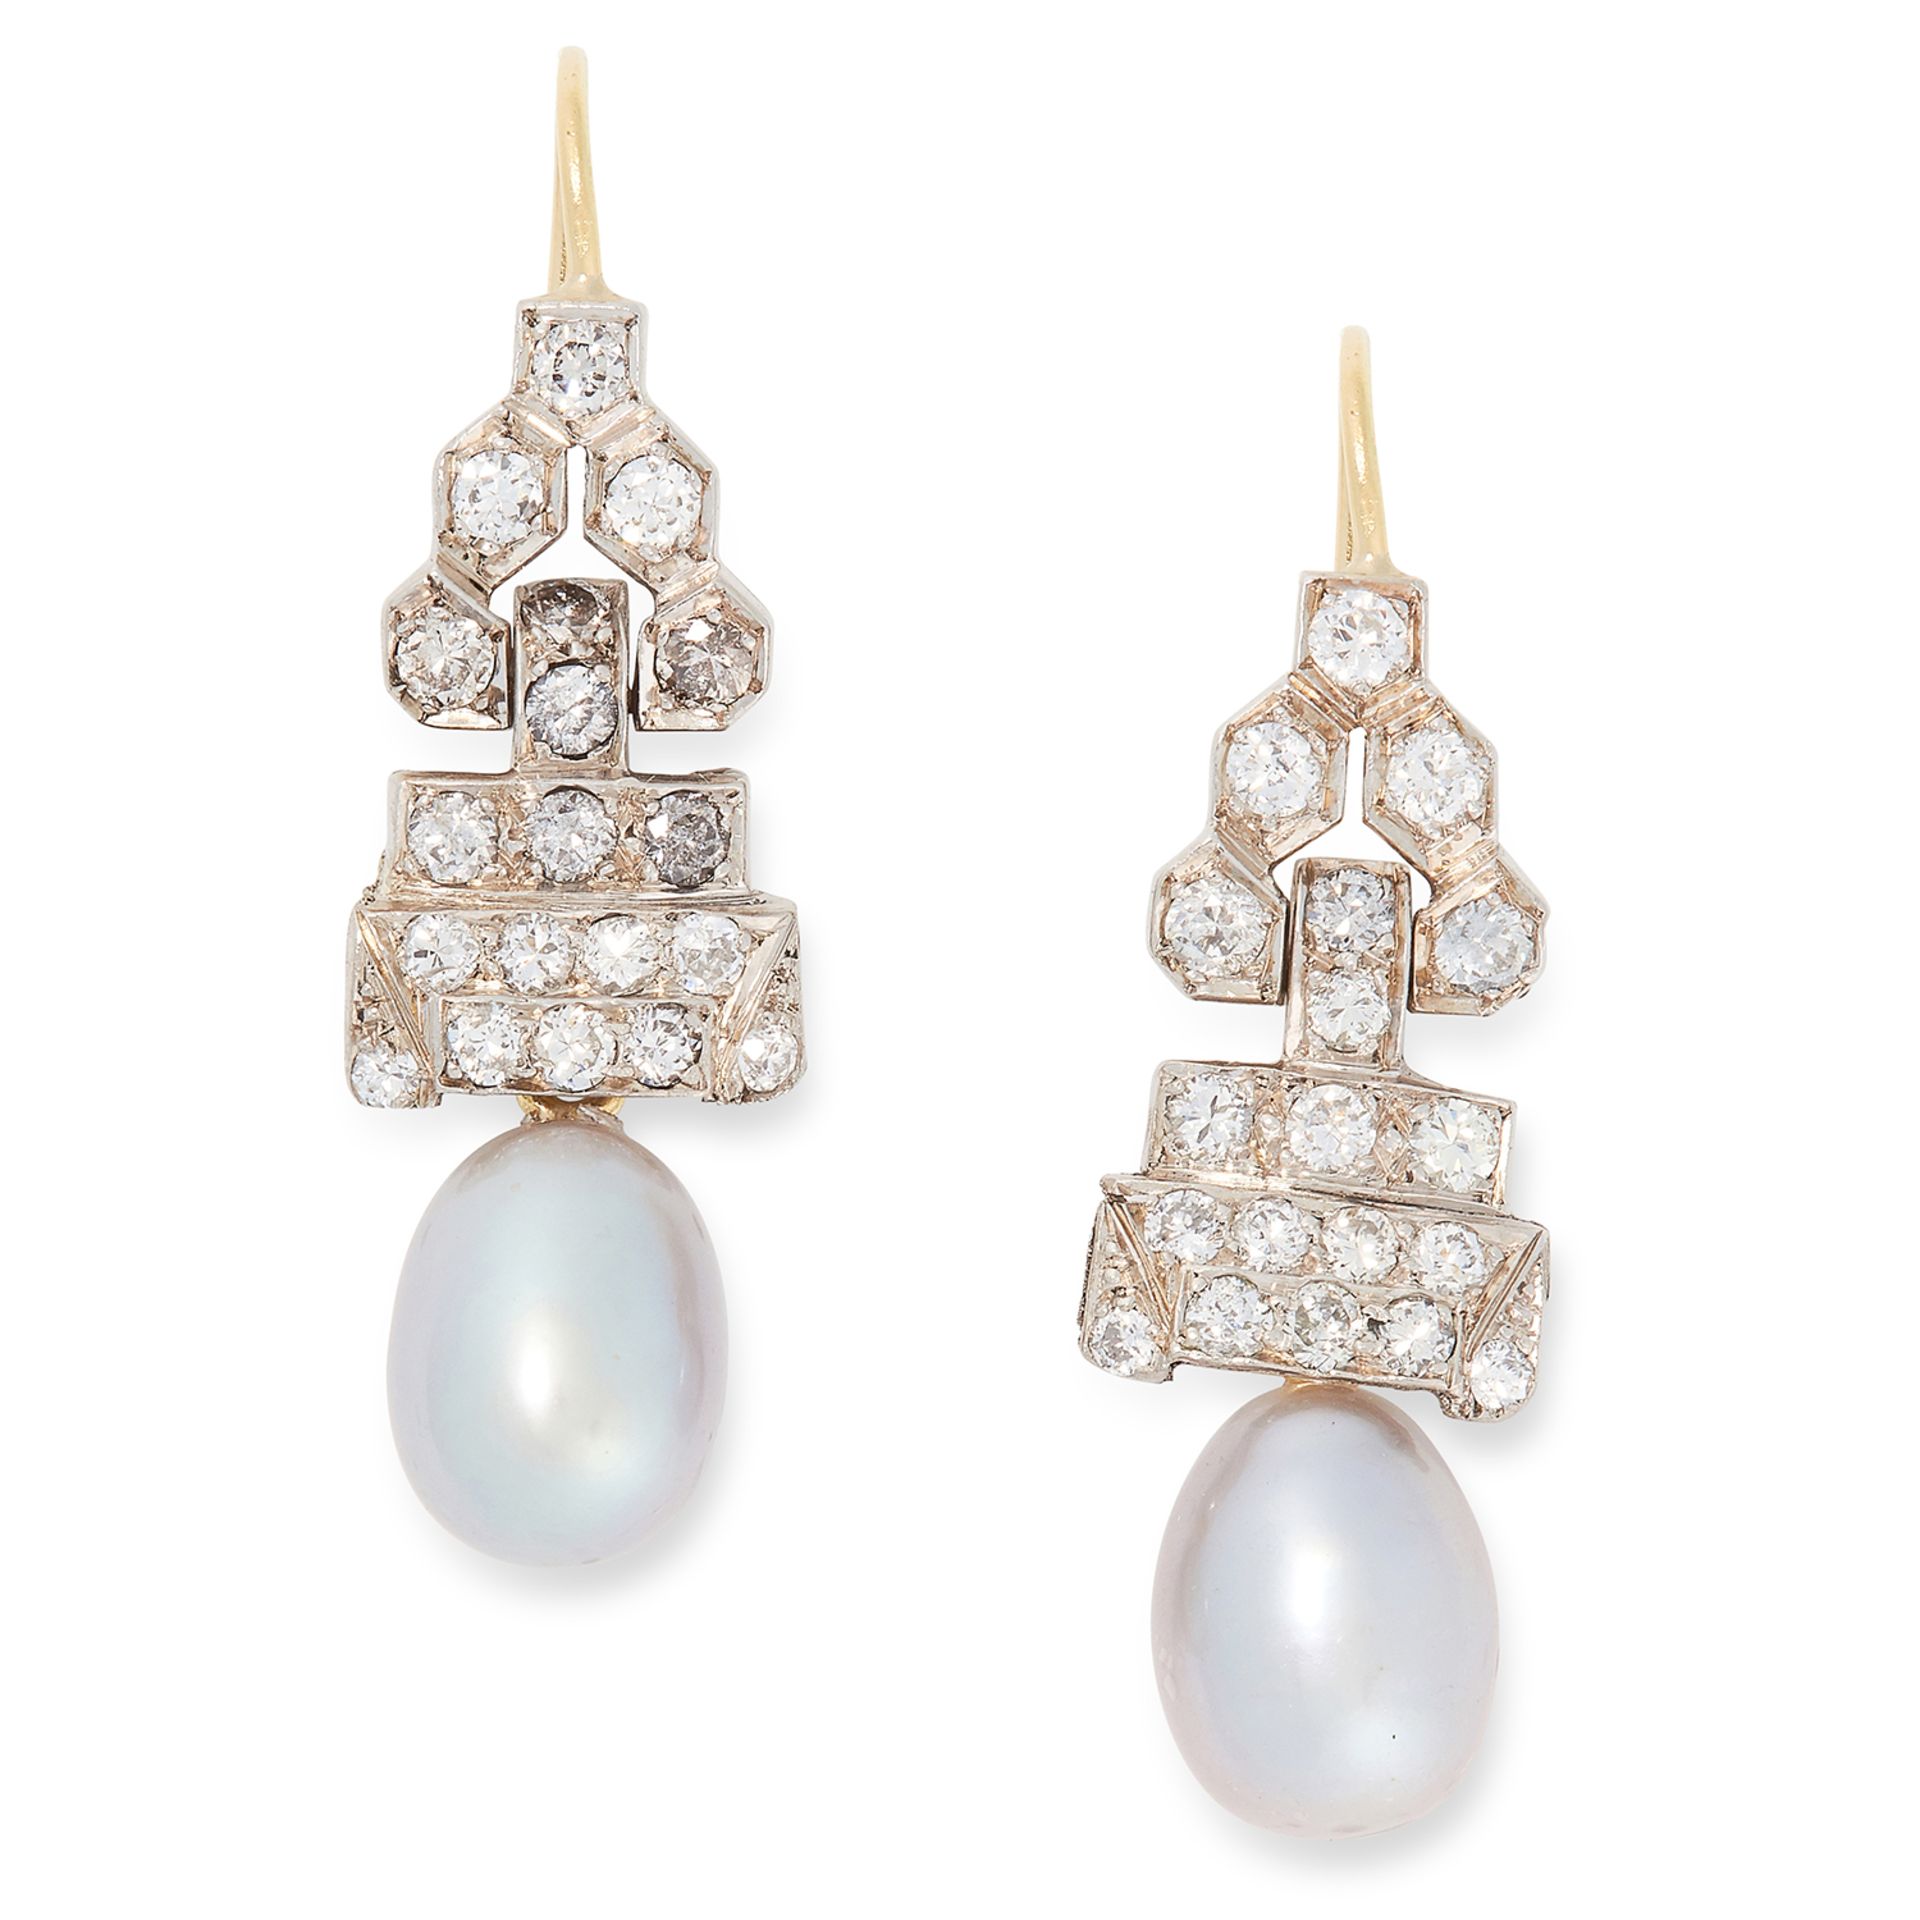 A PAIR OF ART DECO PEARL AND DIAMOND DROP EARRINGS the articulated bodies set with round cut diamond